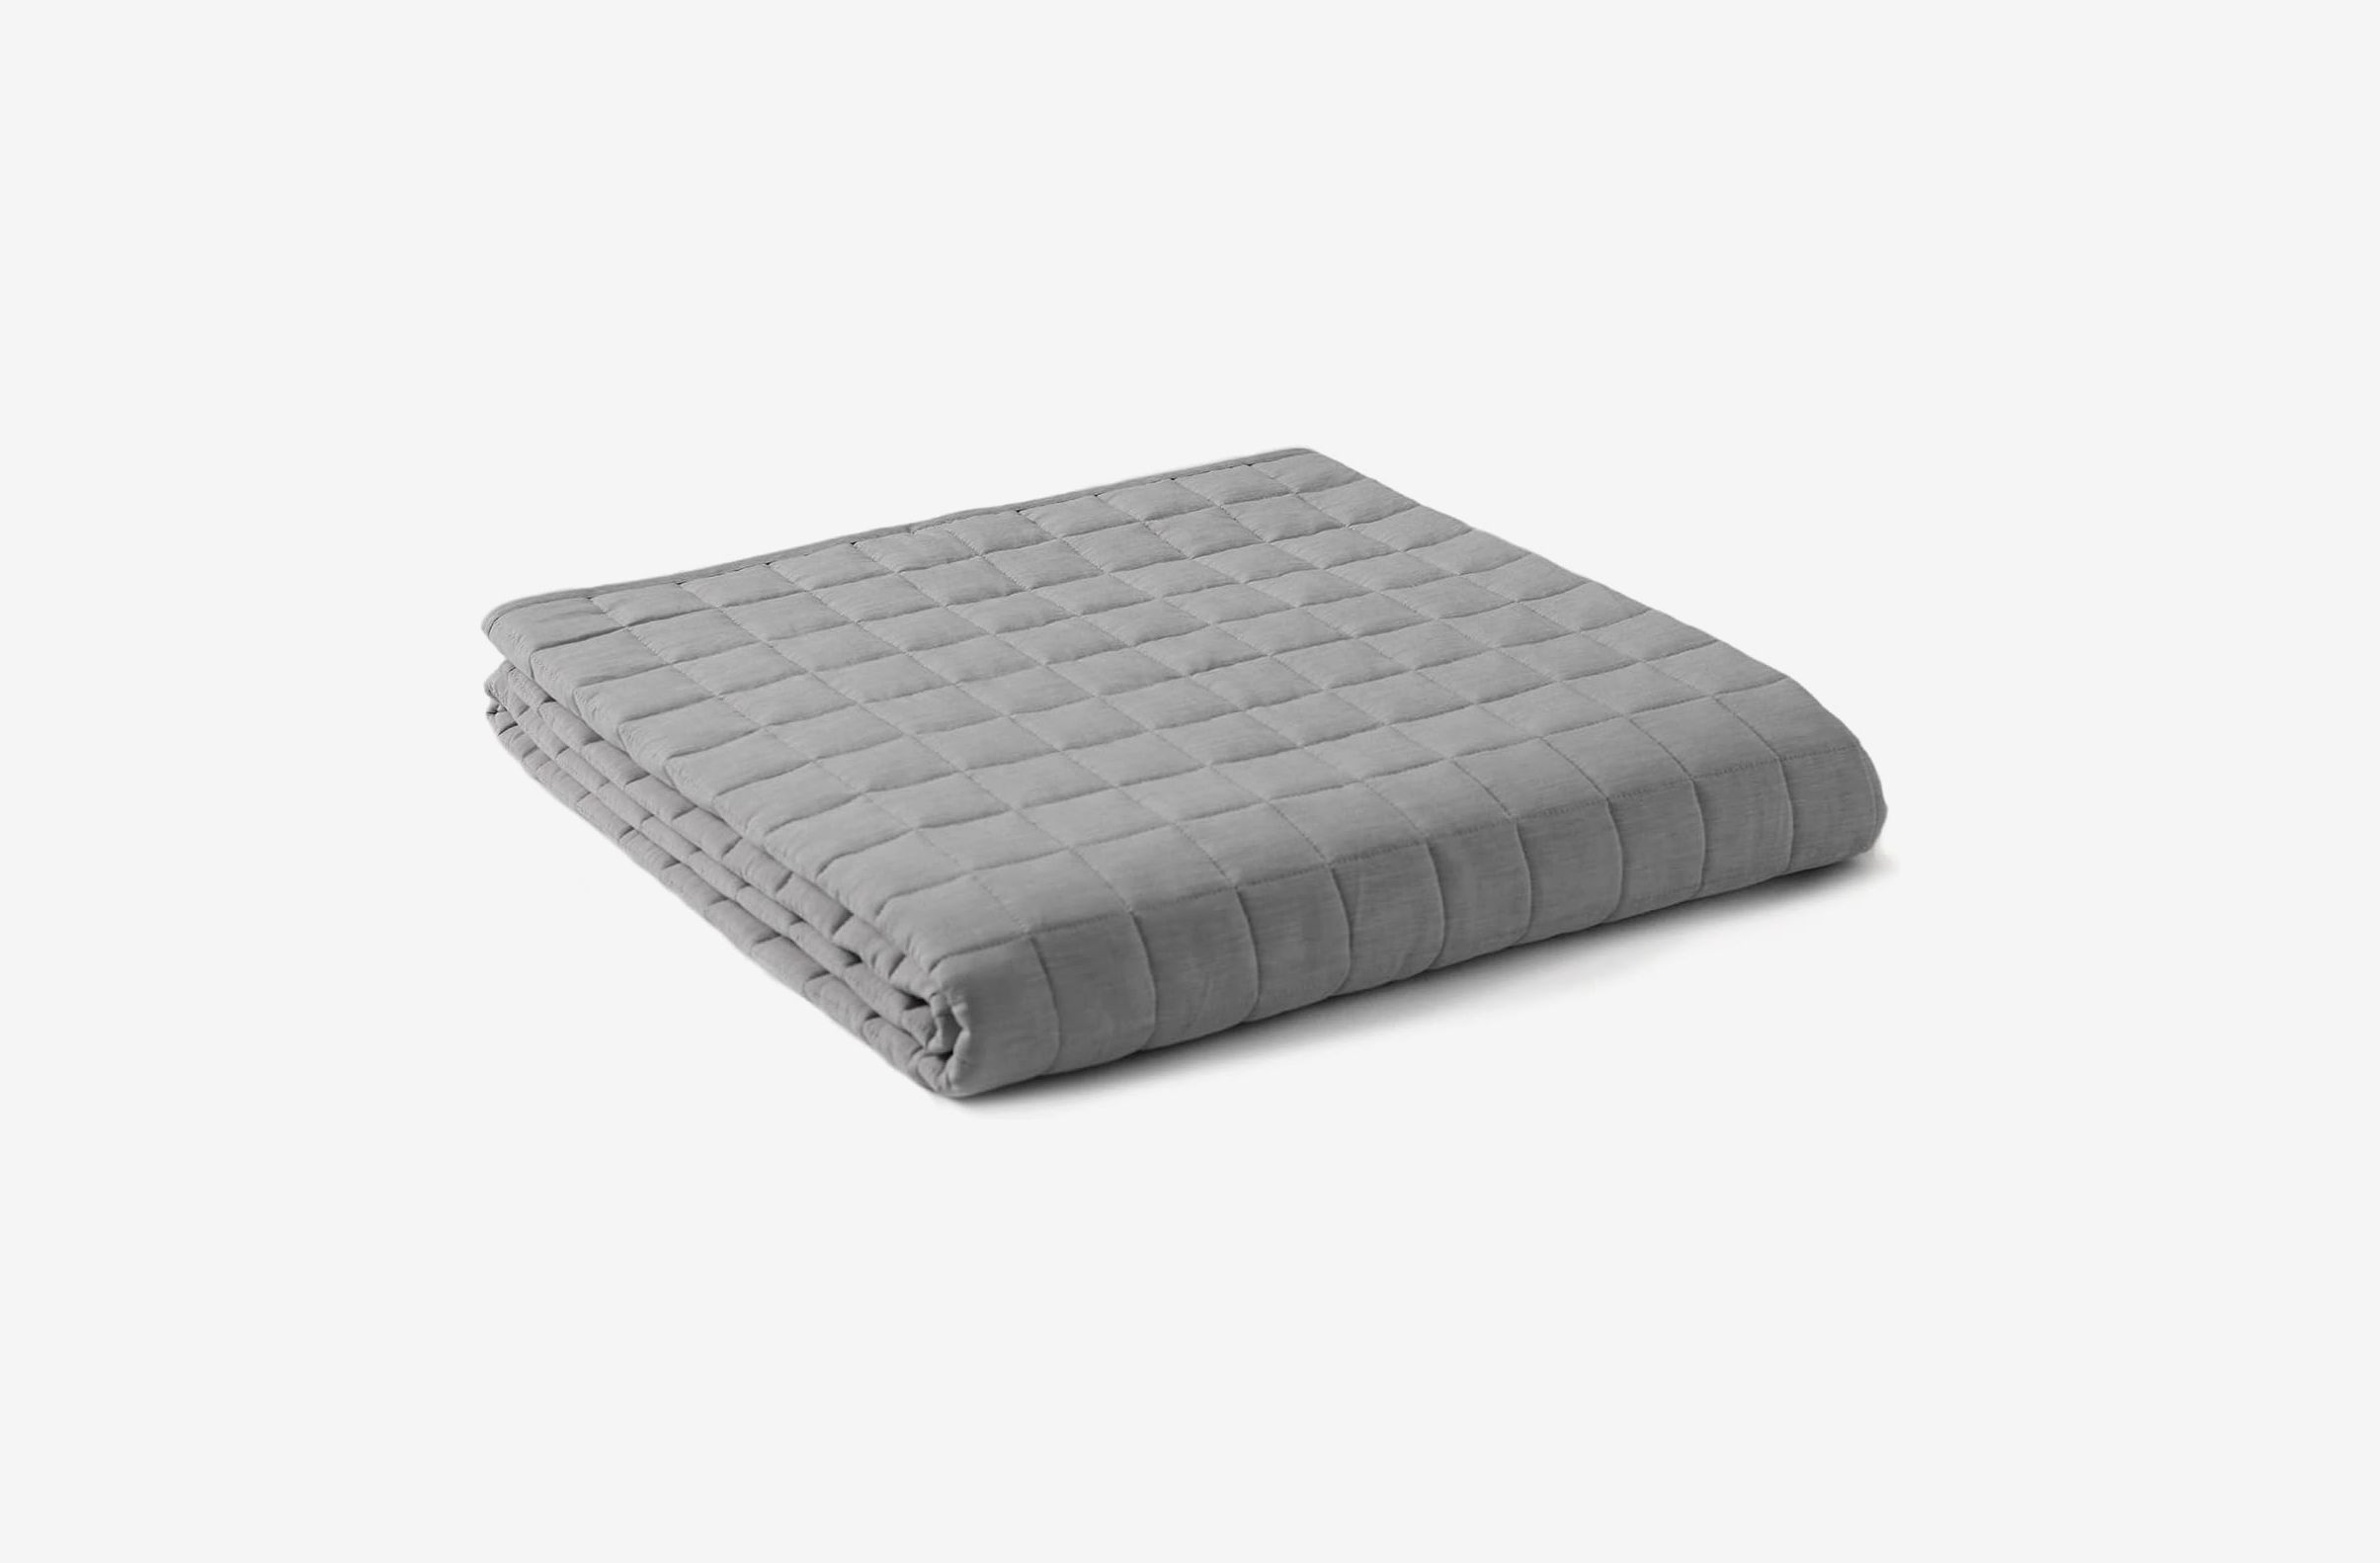  Layla 300 Thread Count Weighted Blanket with Fleece Top Layer,  Even Weight Distribution, 100% Cotton Bottom Layer (25 pounds) : Home &  Kitchen